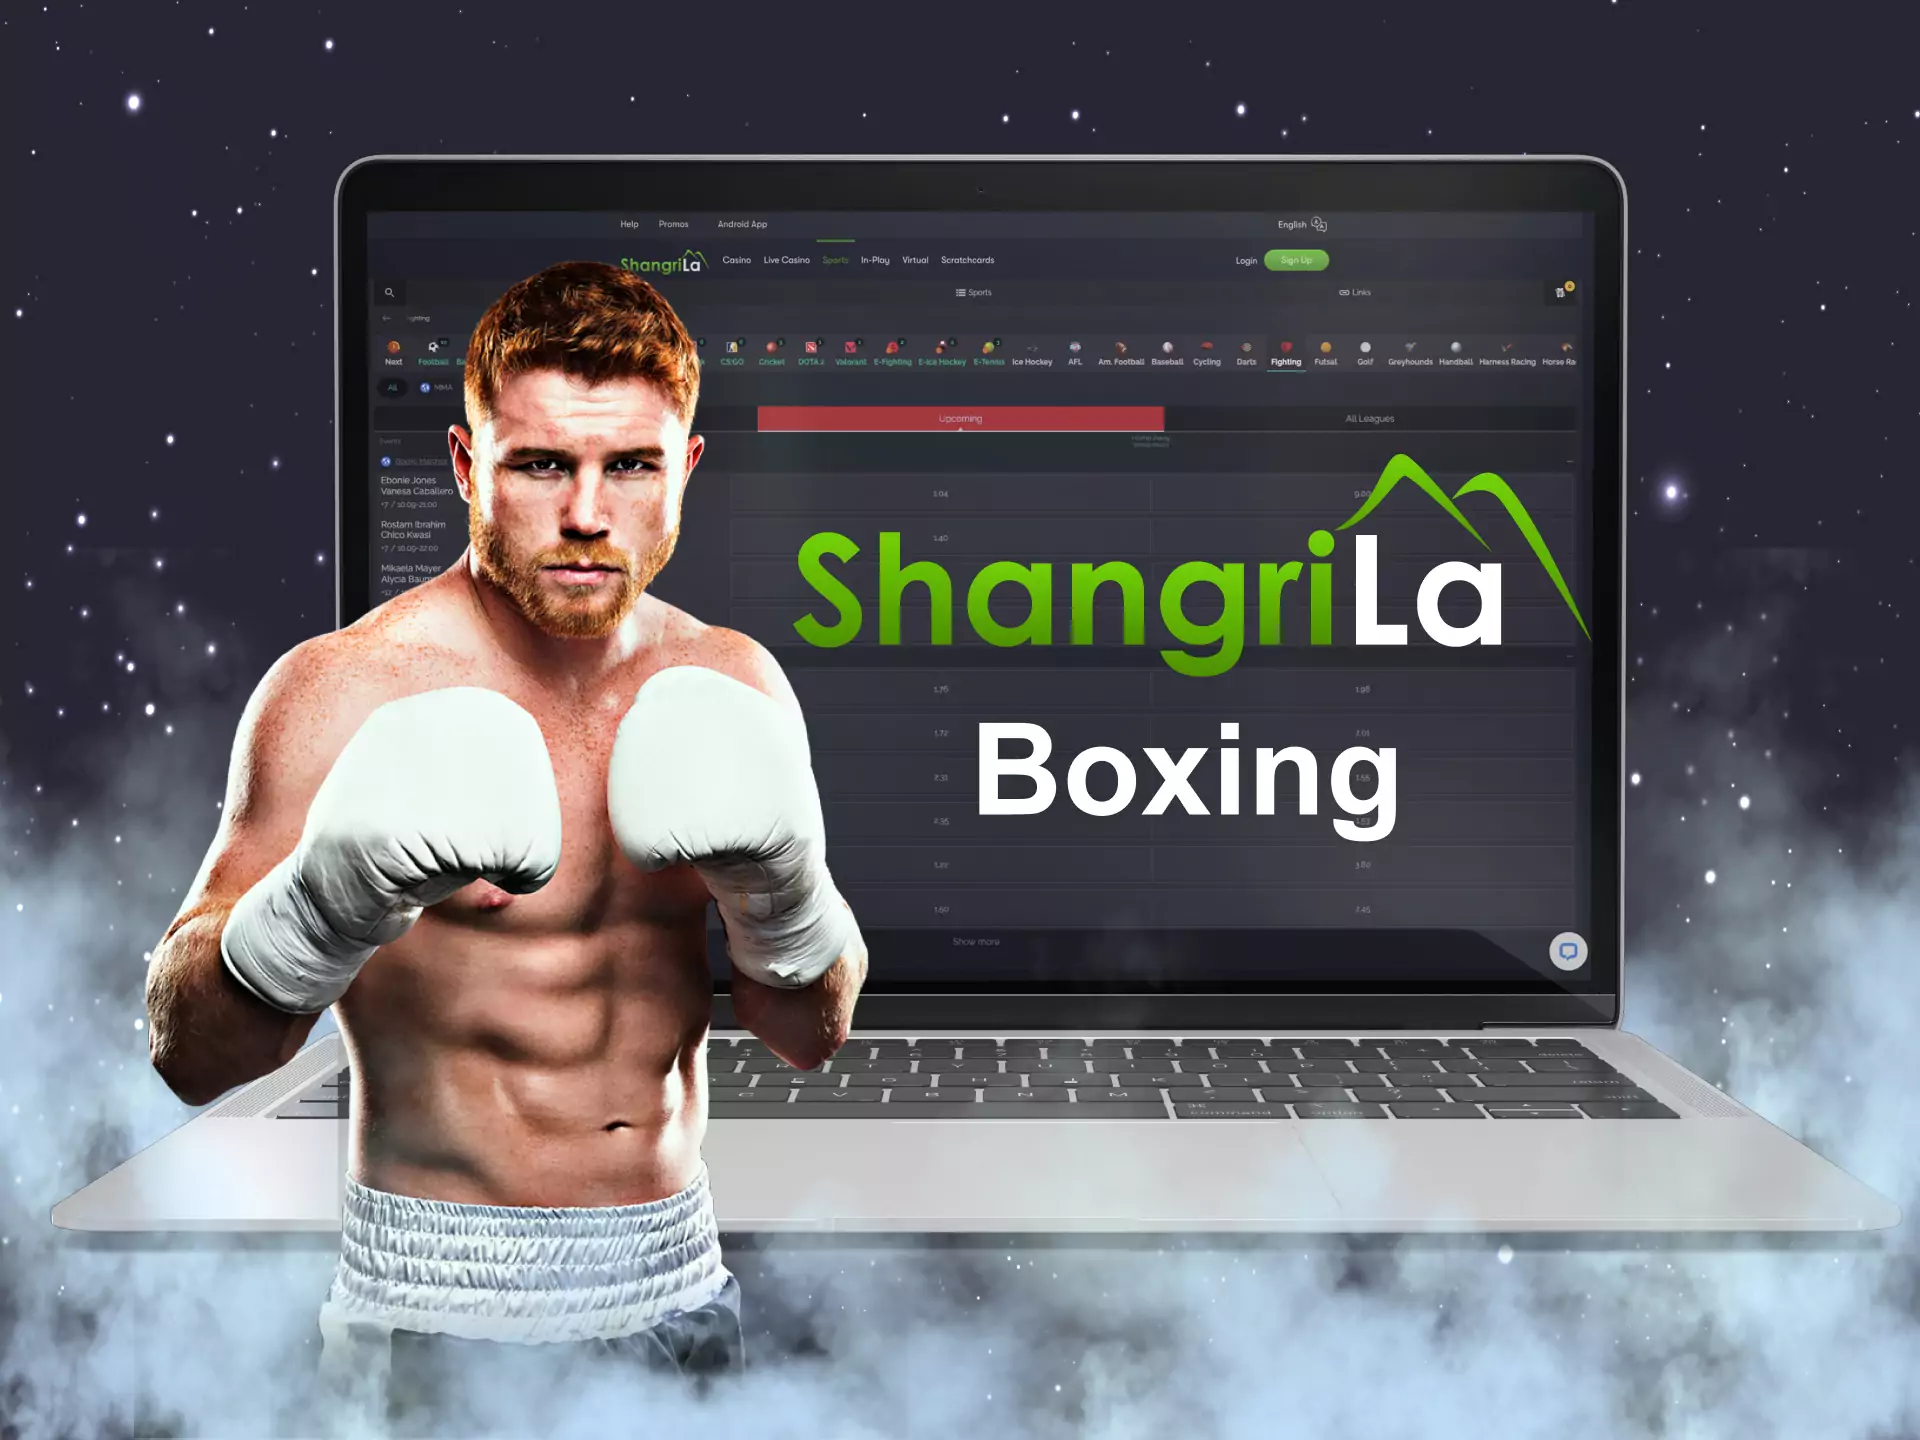 In the Shangri La sportsbook, you can bet on boxing fights.